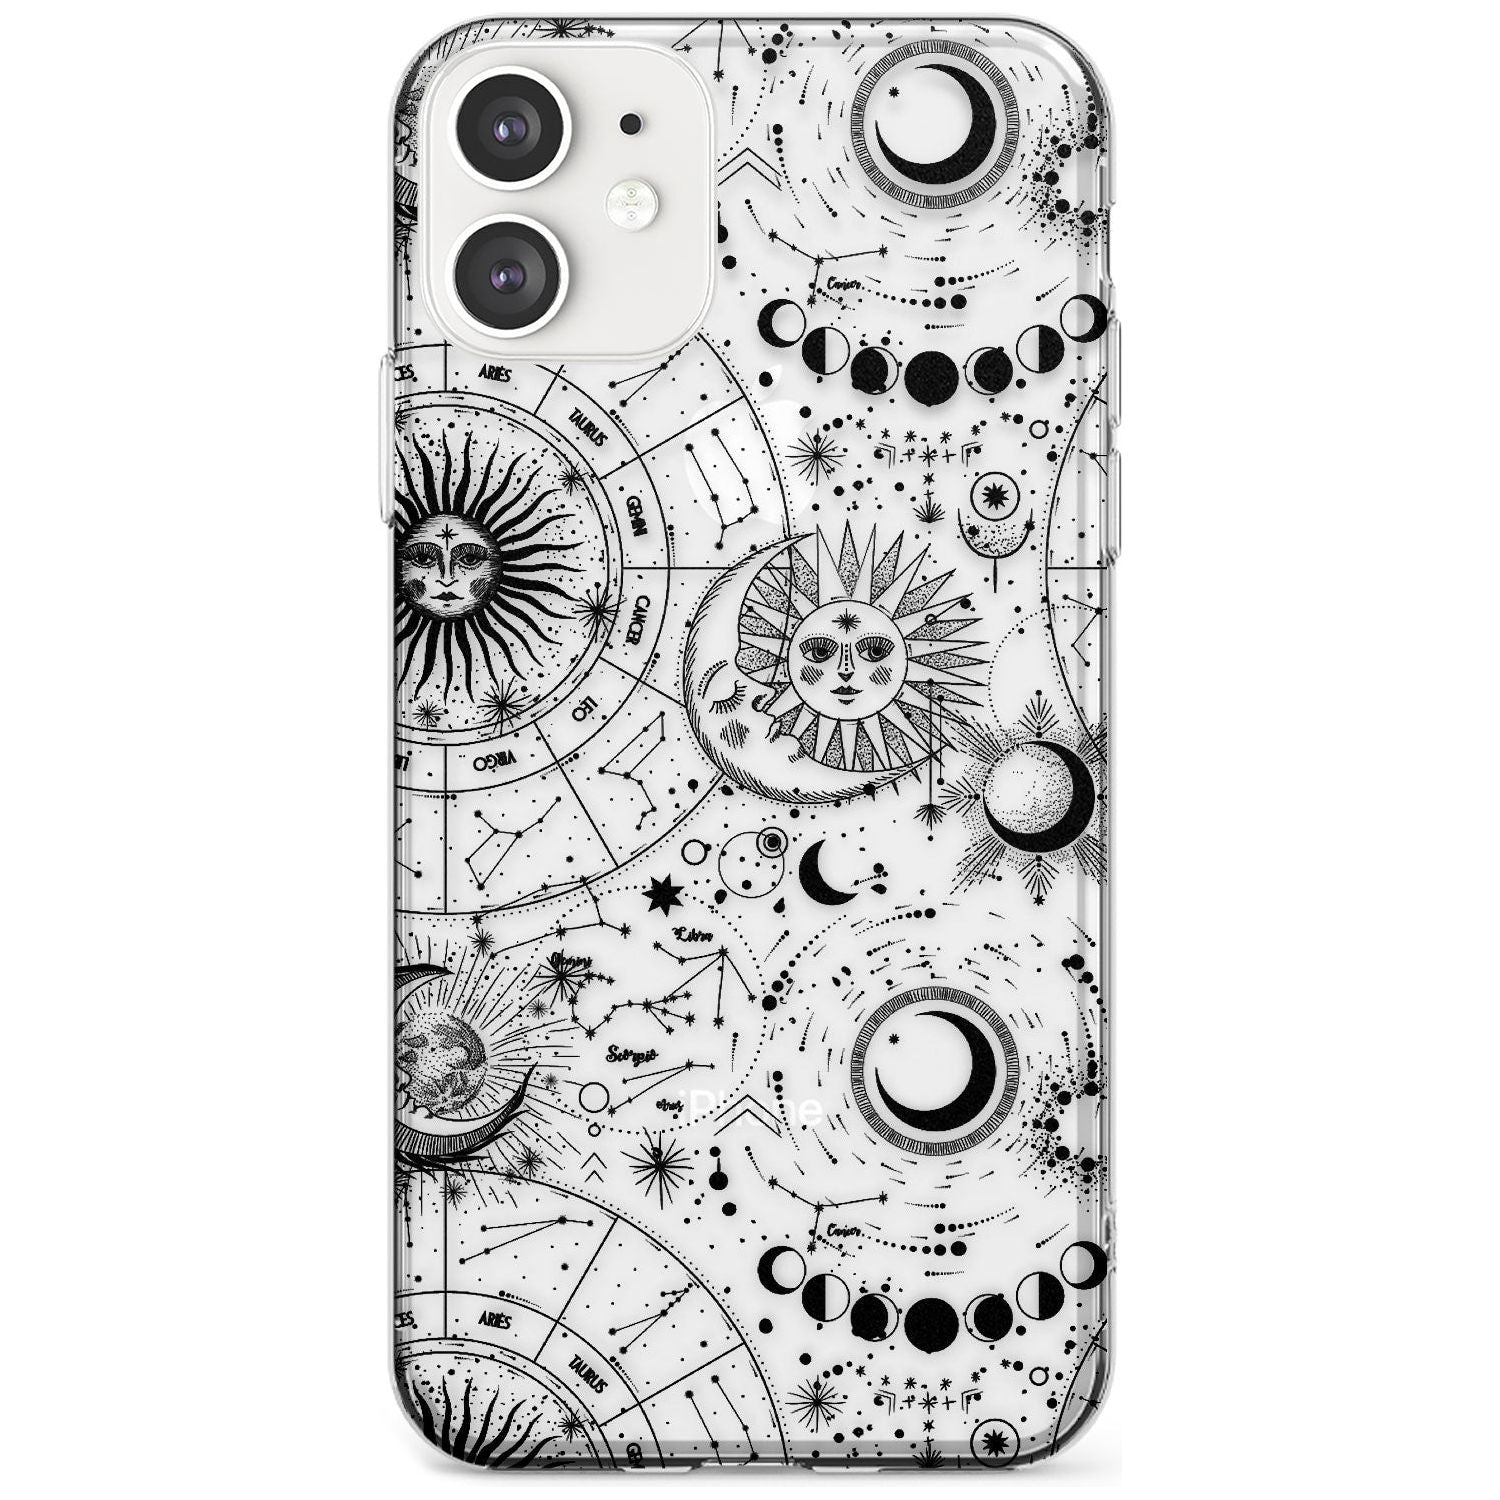 Suns, Moons, Zodiac Signs Astrological Slim TPU Phone Case for iPhone 11